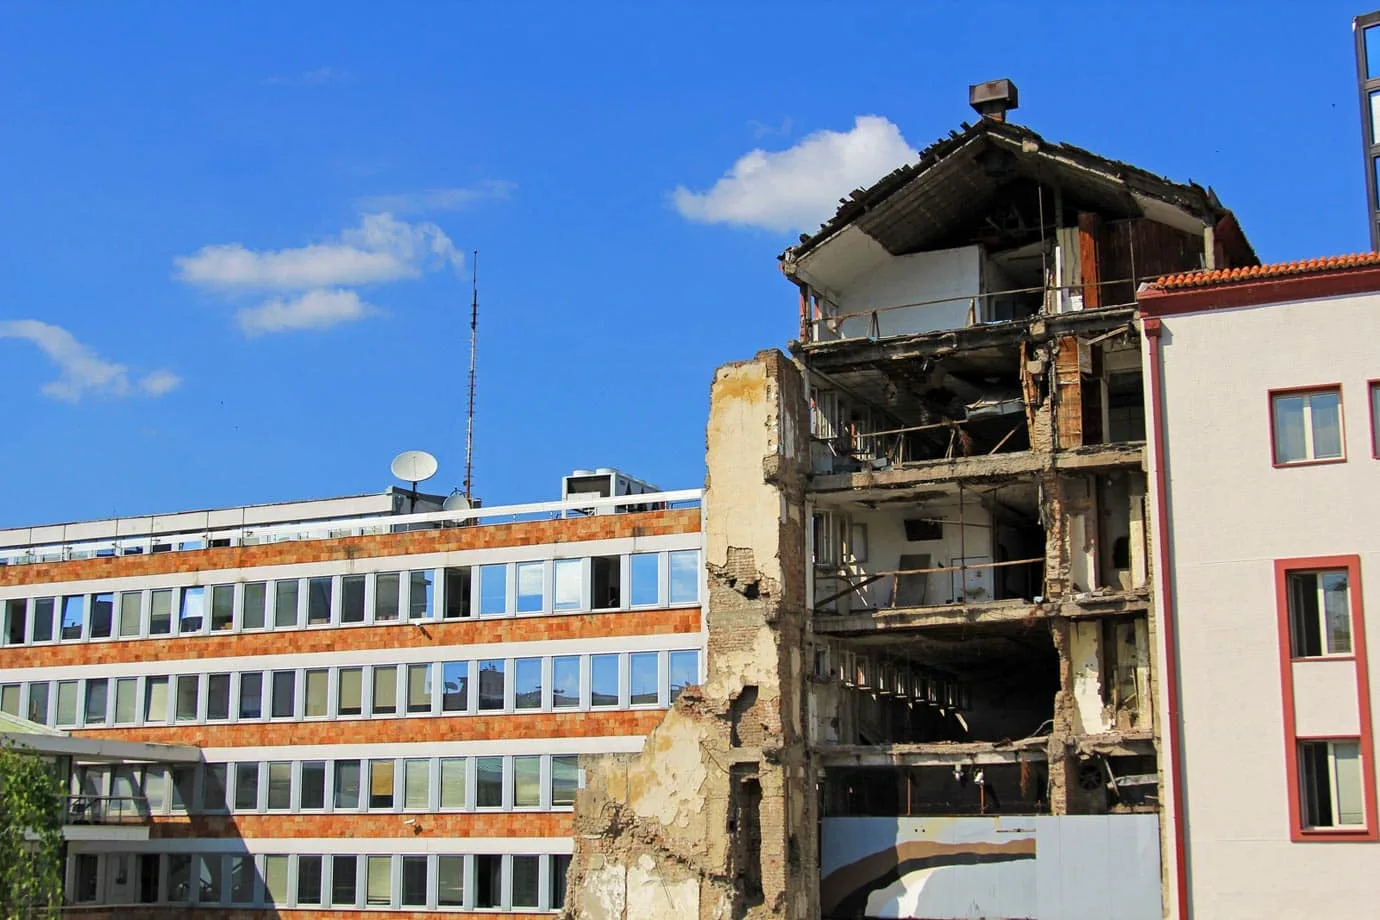 A bombed building in Belgrade that remains untouched as a memorial to the bombings of 1999